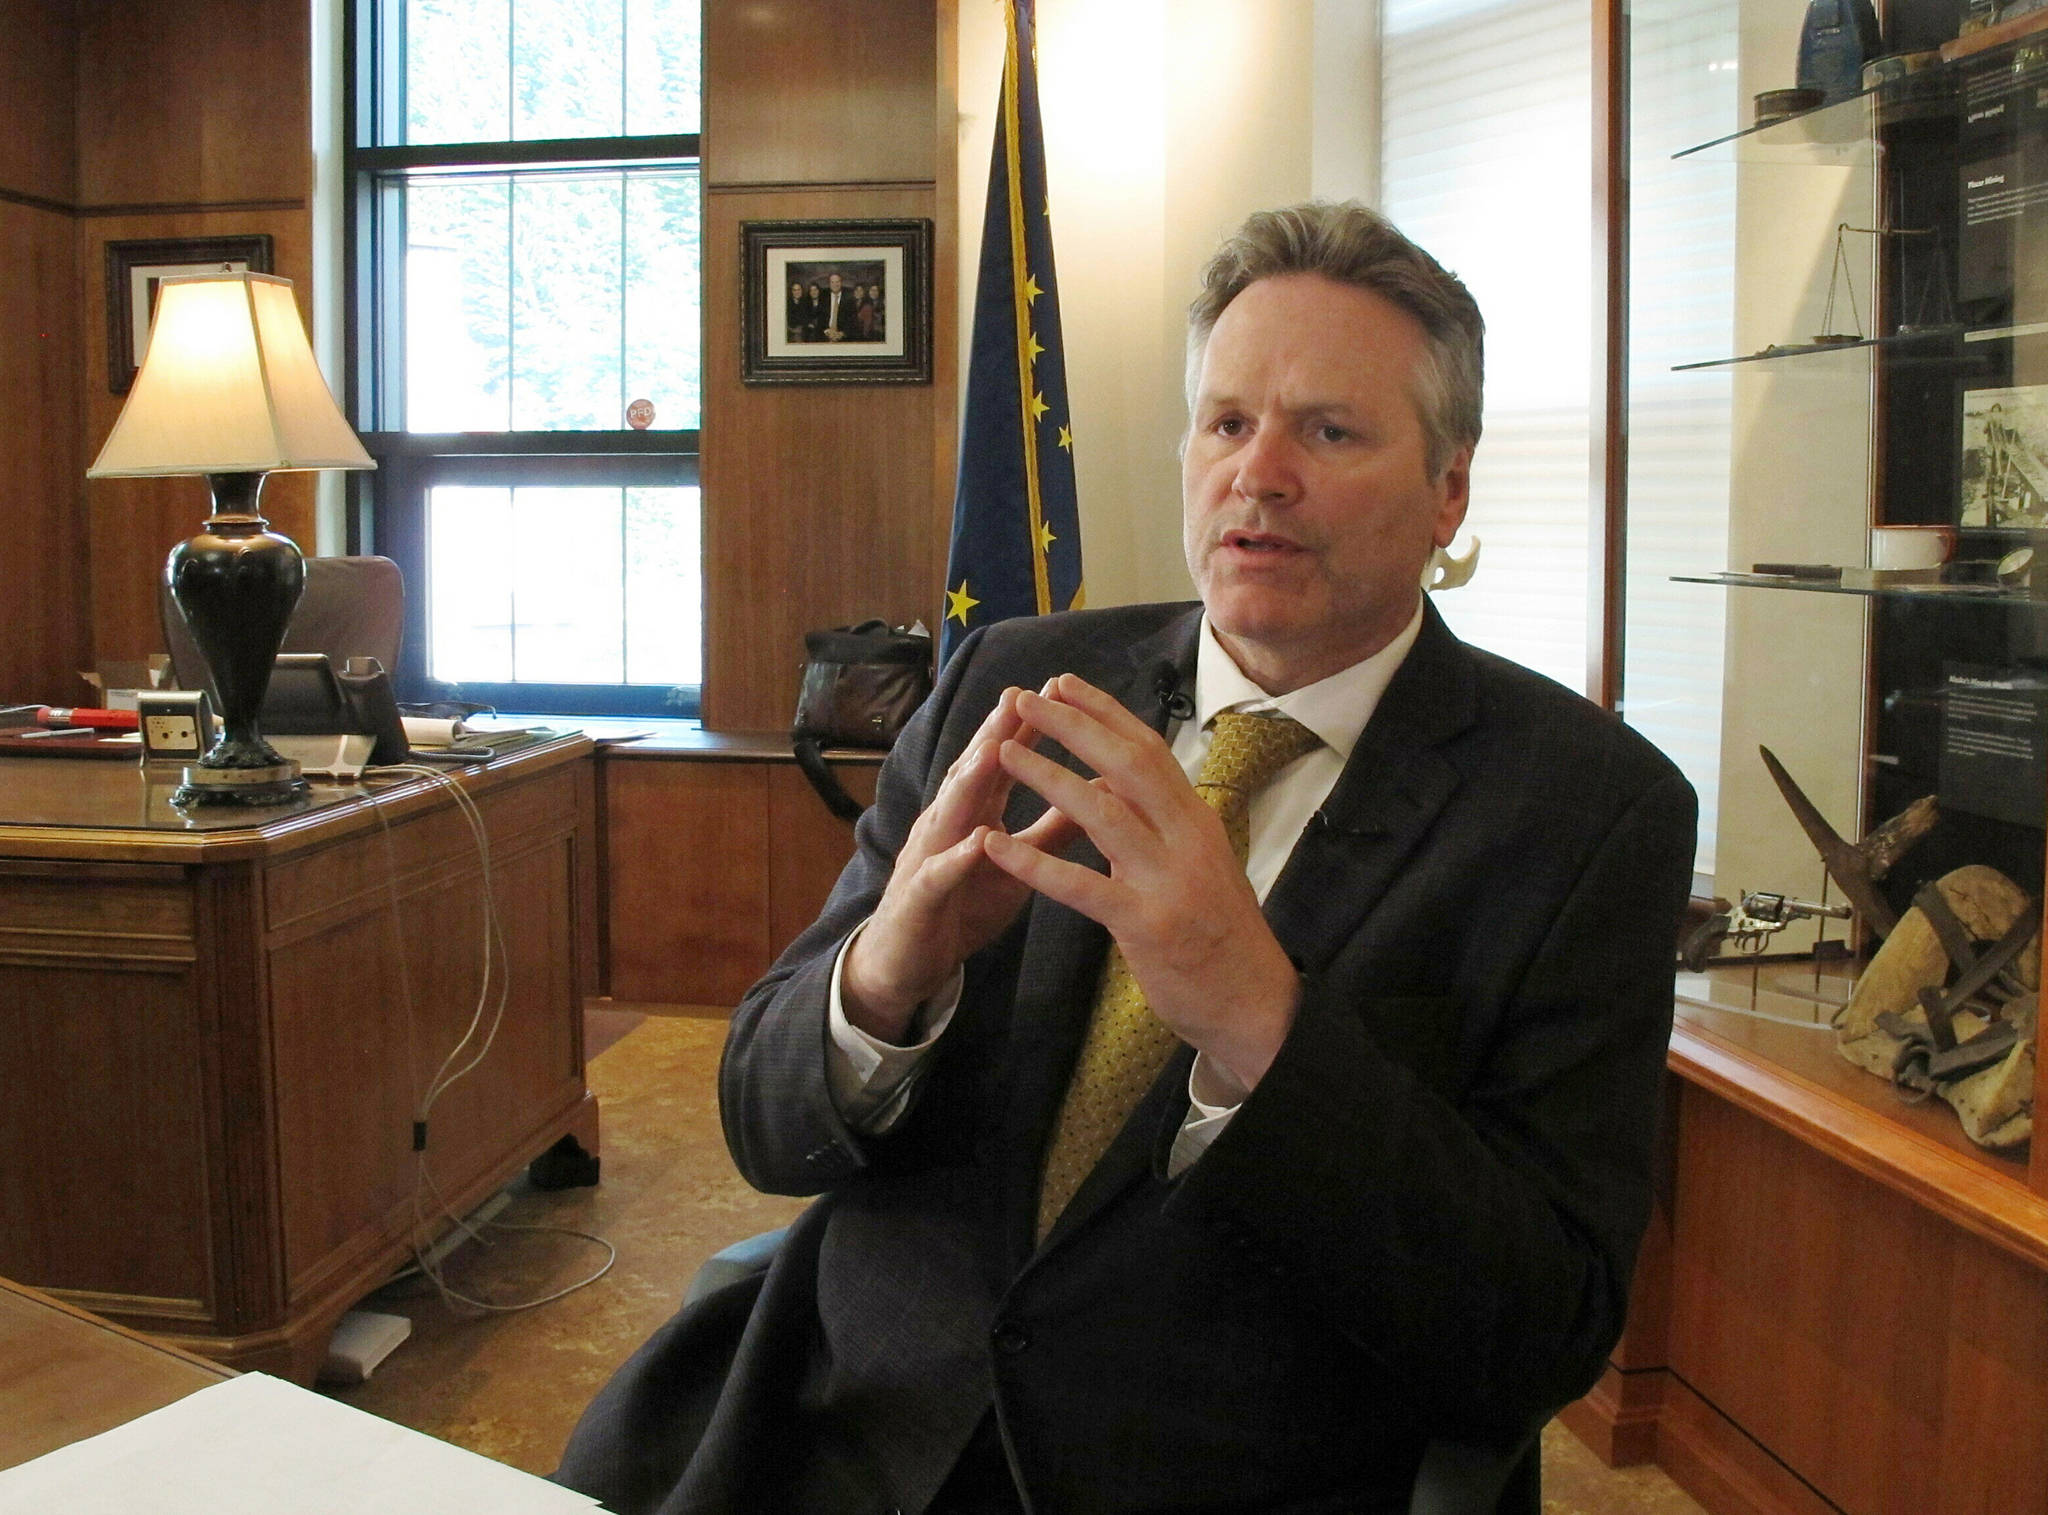 In this May 29 photo, Alaska Gov. Mike Dunleavy speaks to reporters in his office at the state Capitol in Juneau, Alaska. A fight is brewing over whether Dunleavy, a Republican who took office in Dec. 2018, should be recalled. Critics say he’s incompetent and has recklessly tried to cut spending while supporters see a politically motivated attempt to undo the last election. (AP Photo | Becky Bohrer)